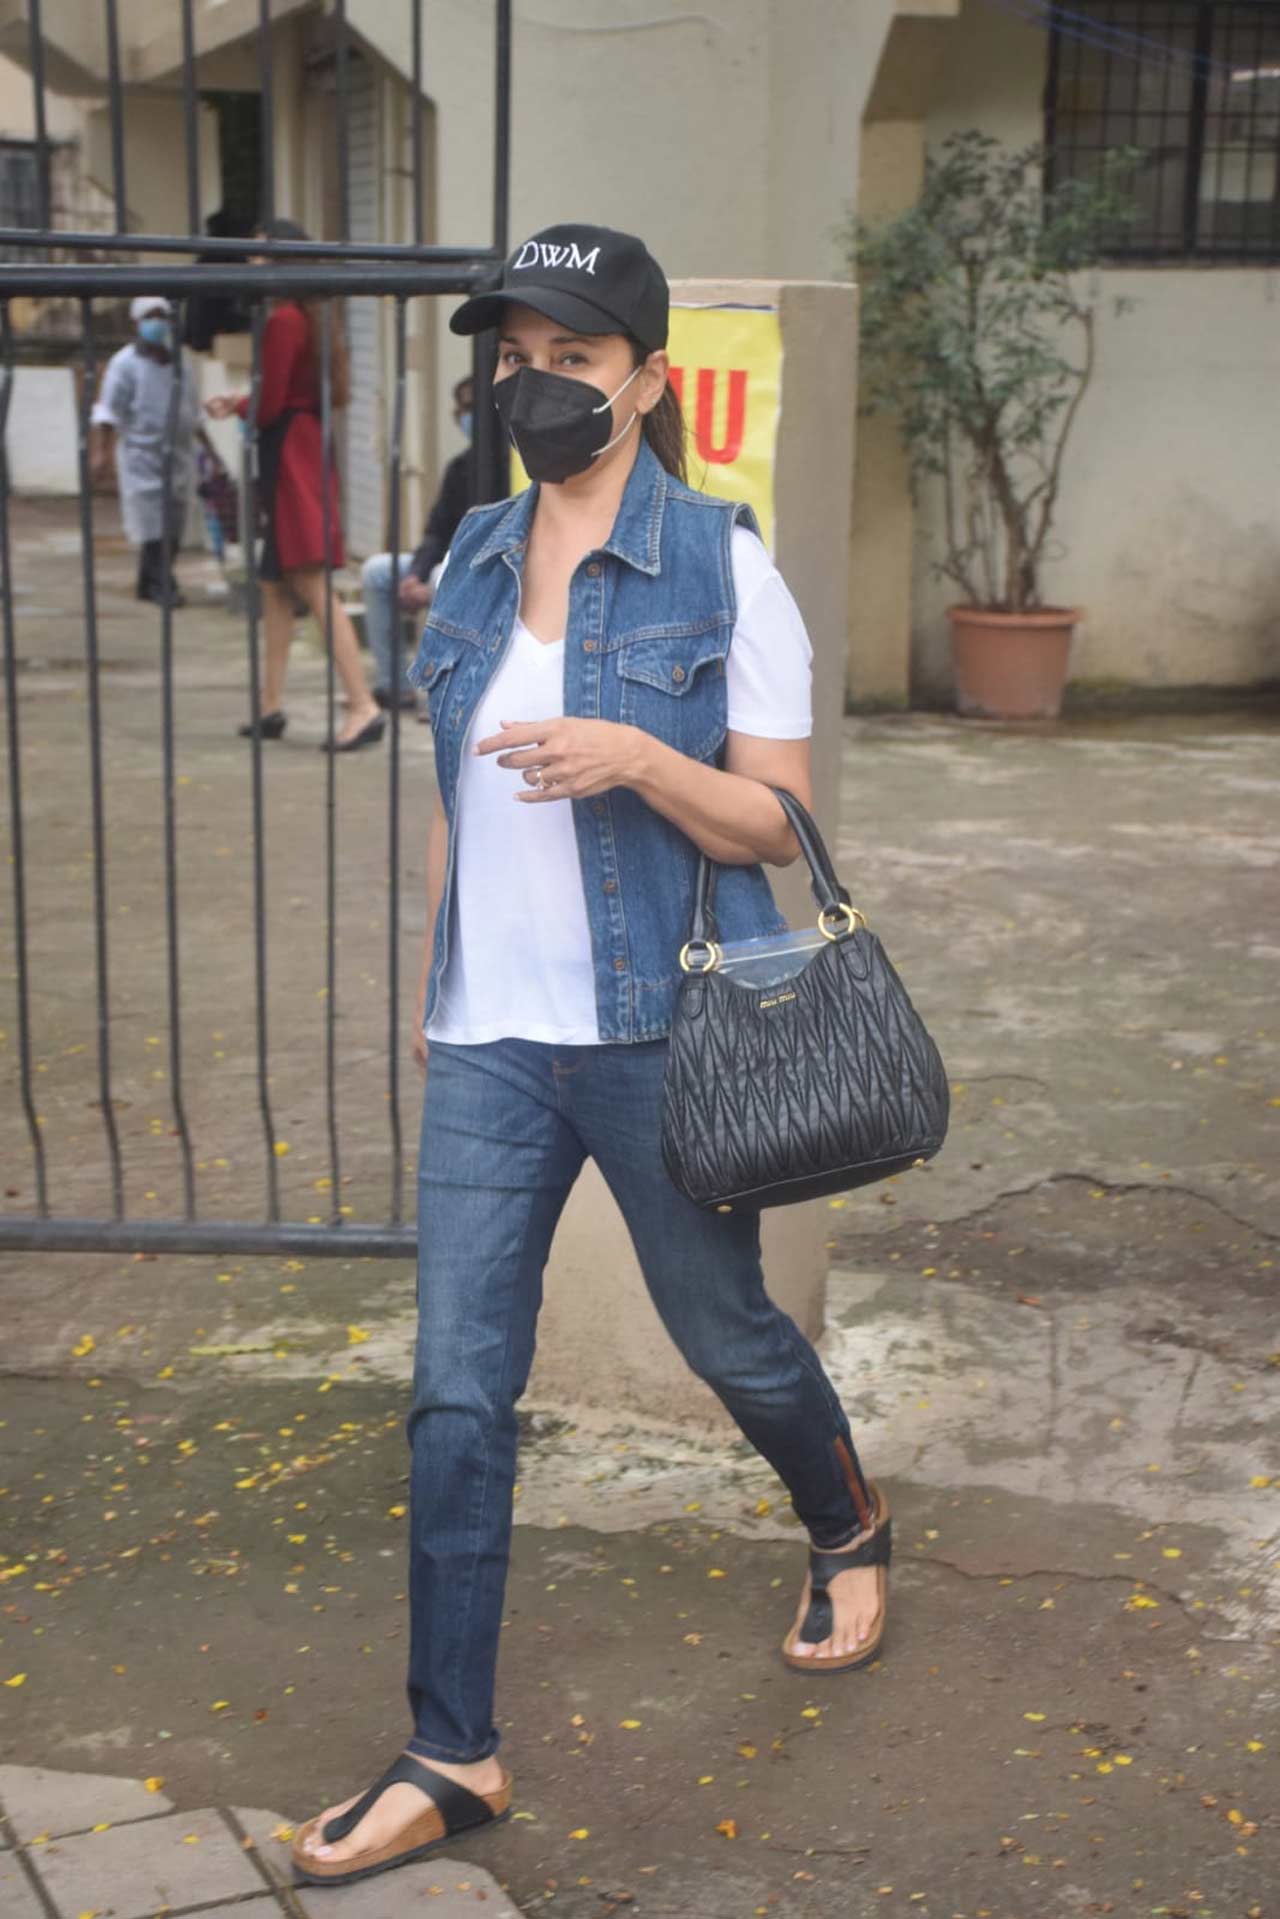 Madhuri Dixit-Nene was snapped at a salon in Mumbai. She was seen wearing a trendy denim jacket, paired with a white tee and basic denim. On the work front, Madhuri is all set to make her web series debut with the show 'Finding Anamika' which also stars Sanjay Kapoor.